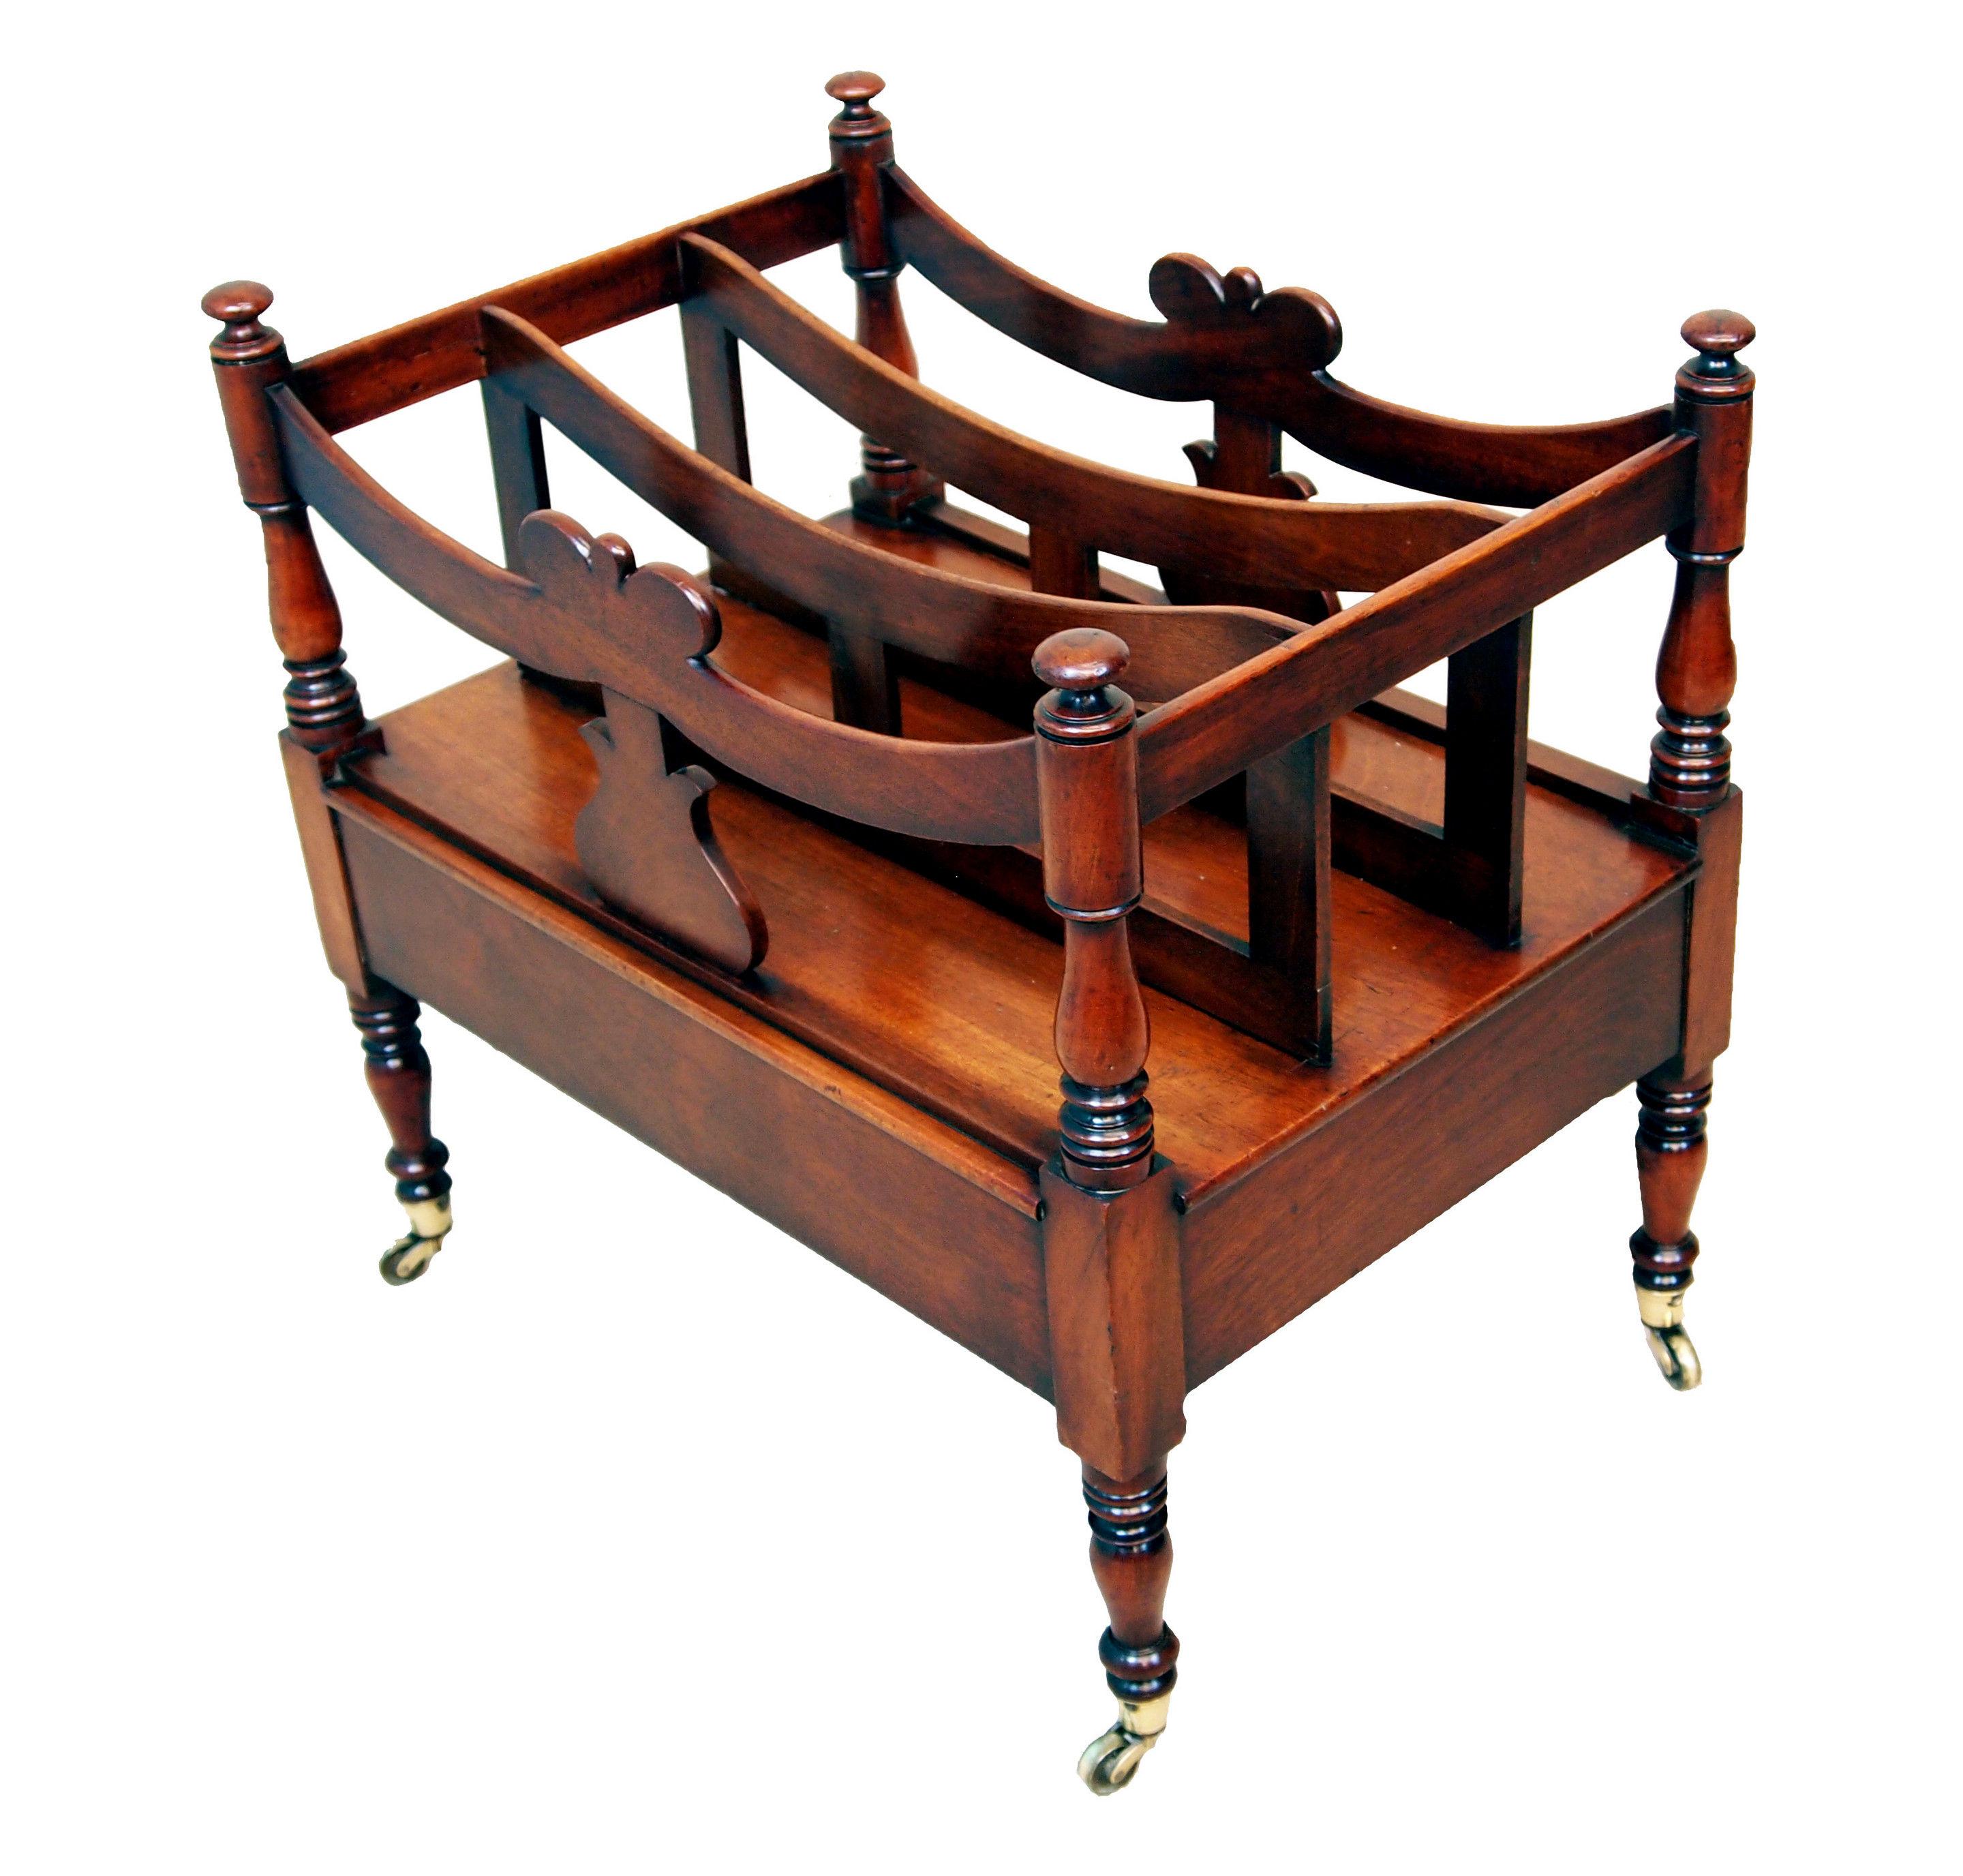 19th century (Regency Period, 1820s) English mahogany canterbury. It is boat shaped with its silhouette upright supporting the dividers above one frieze drawer with turned legs on its original casters. These objects are called canterburies because